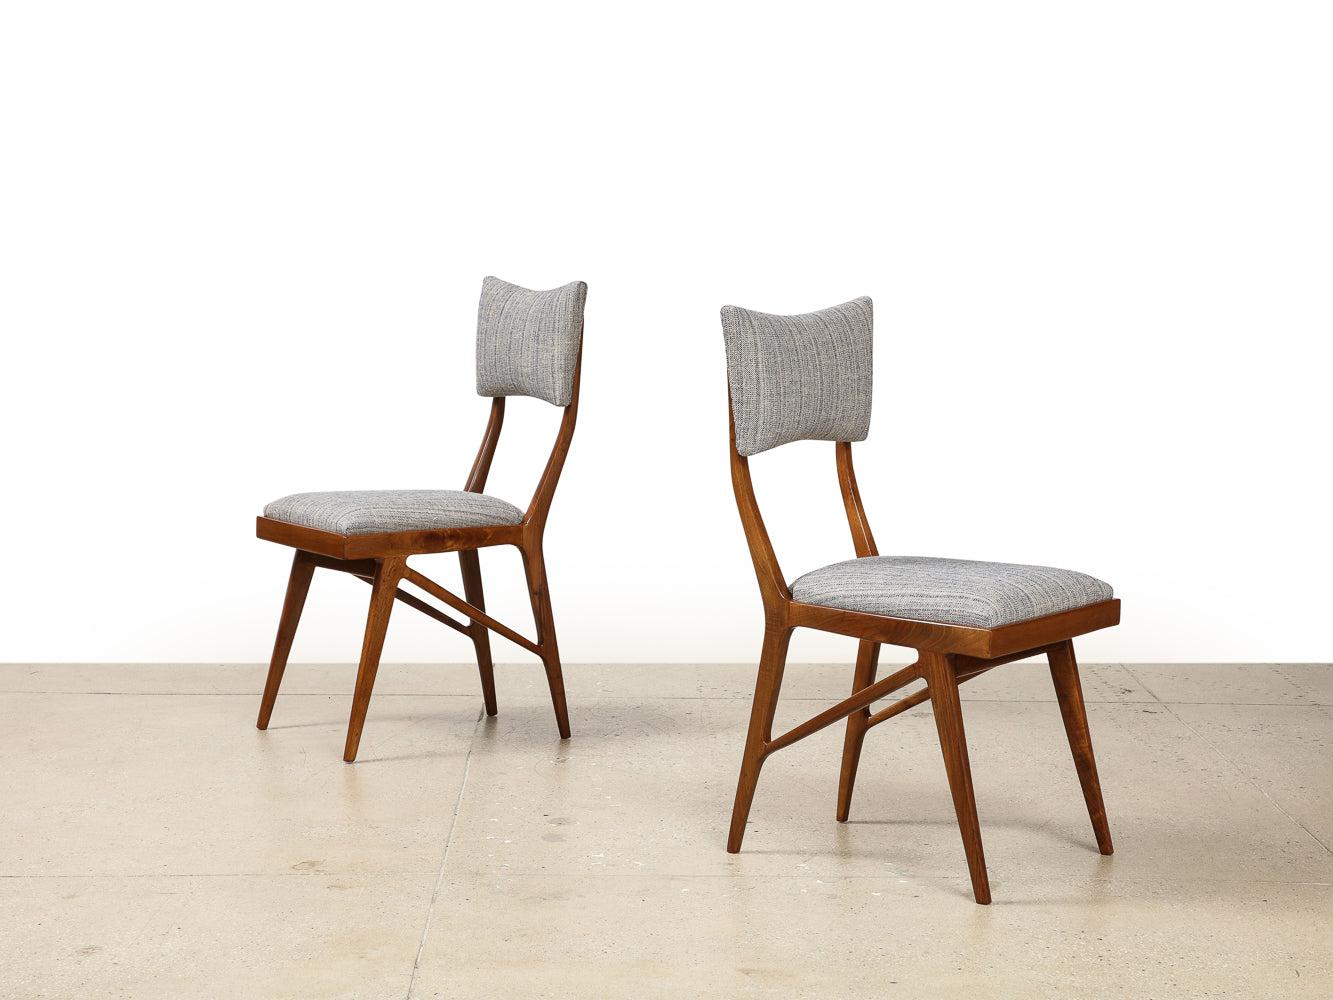 Sculptural Dining Chairs, School of Turin